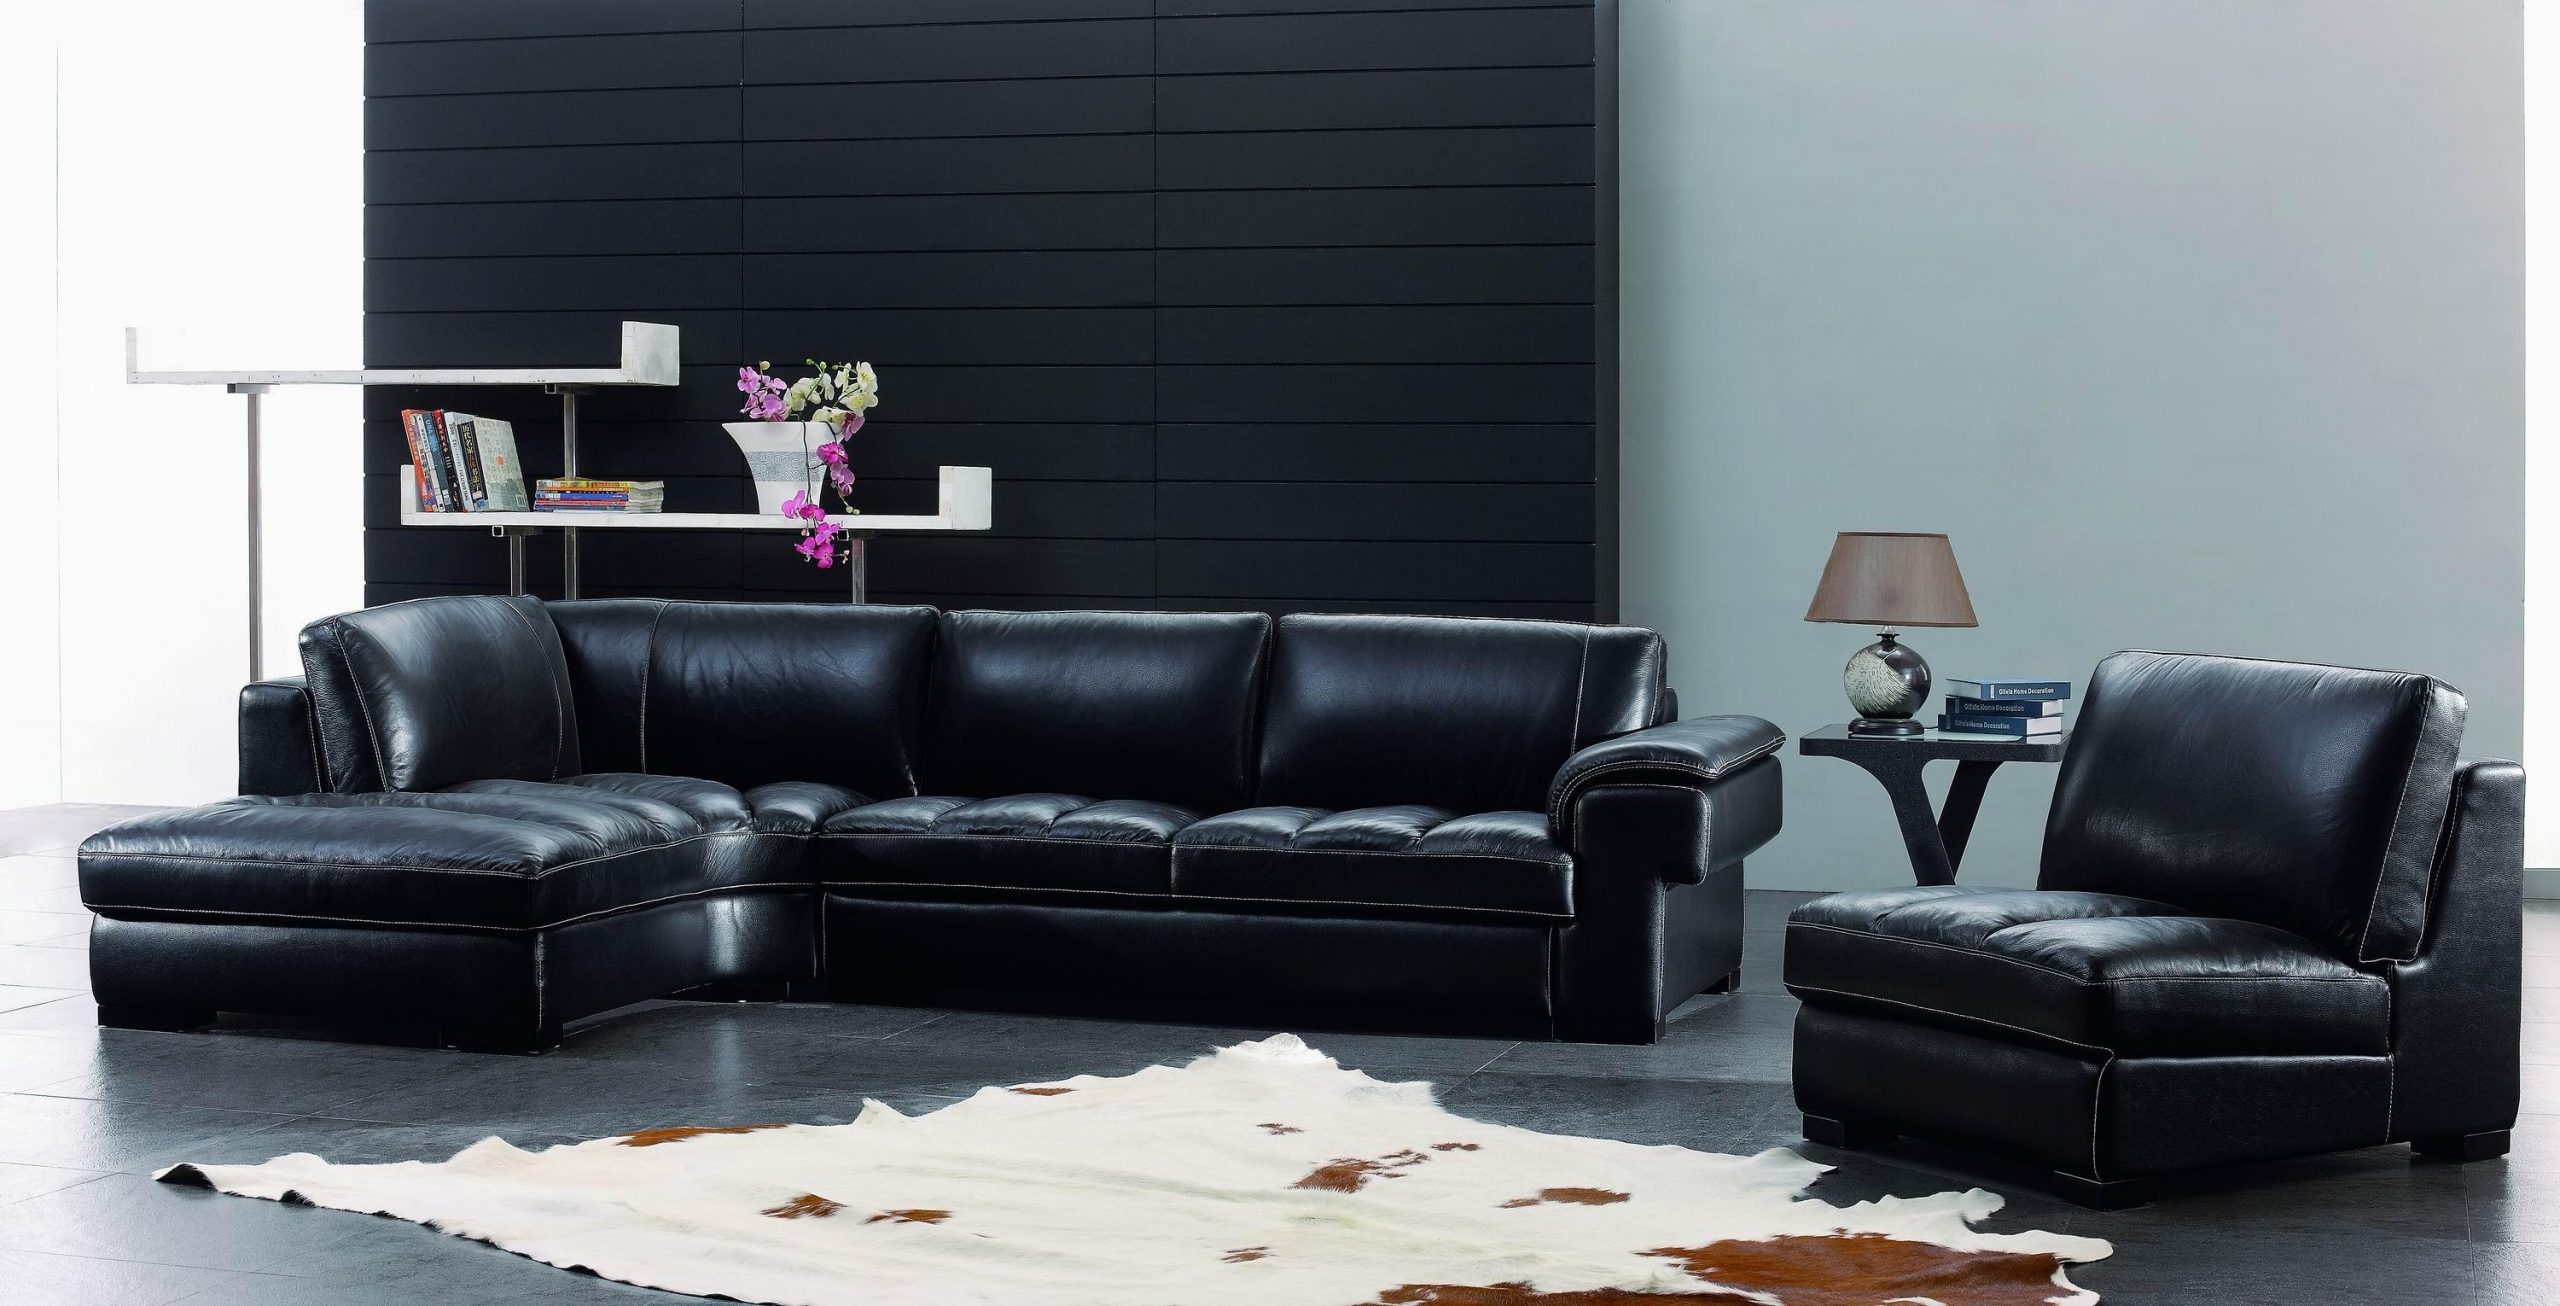 Contemporary Leather Furniture With Black SOfa Small Table Books Lamp Black Stained Wall Ideas Flower Small Storage Cowhide Rug And Best Flooring Furniture + Accessories